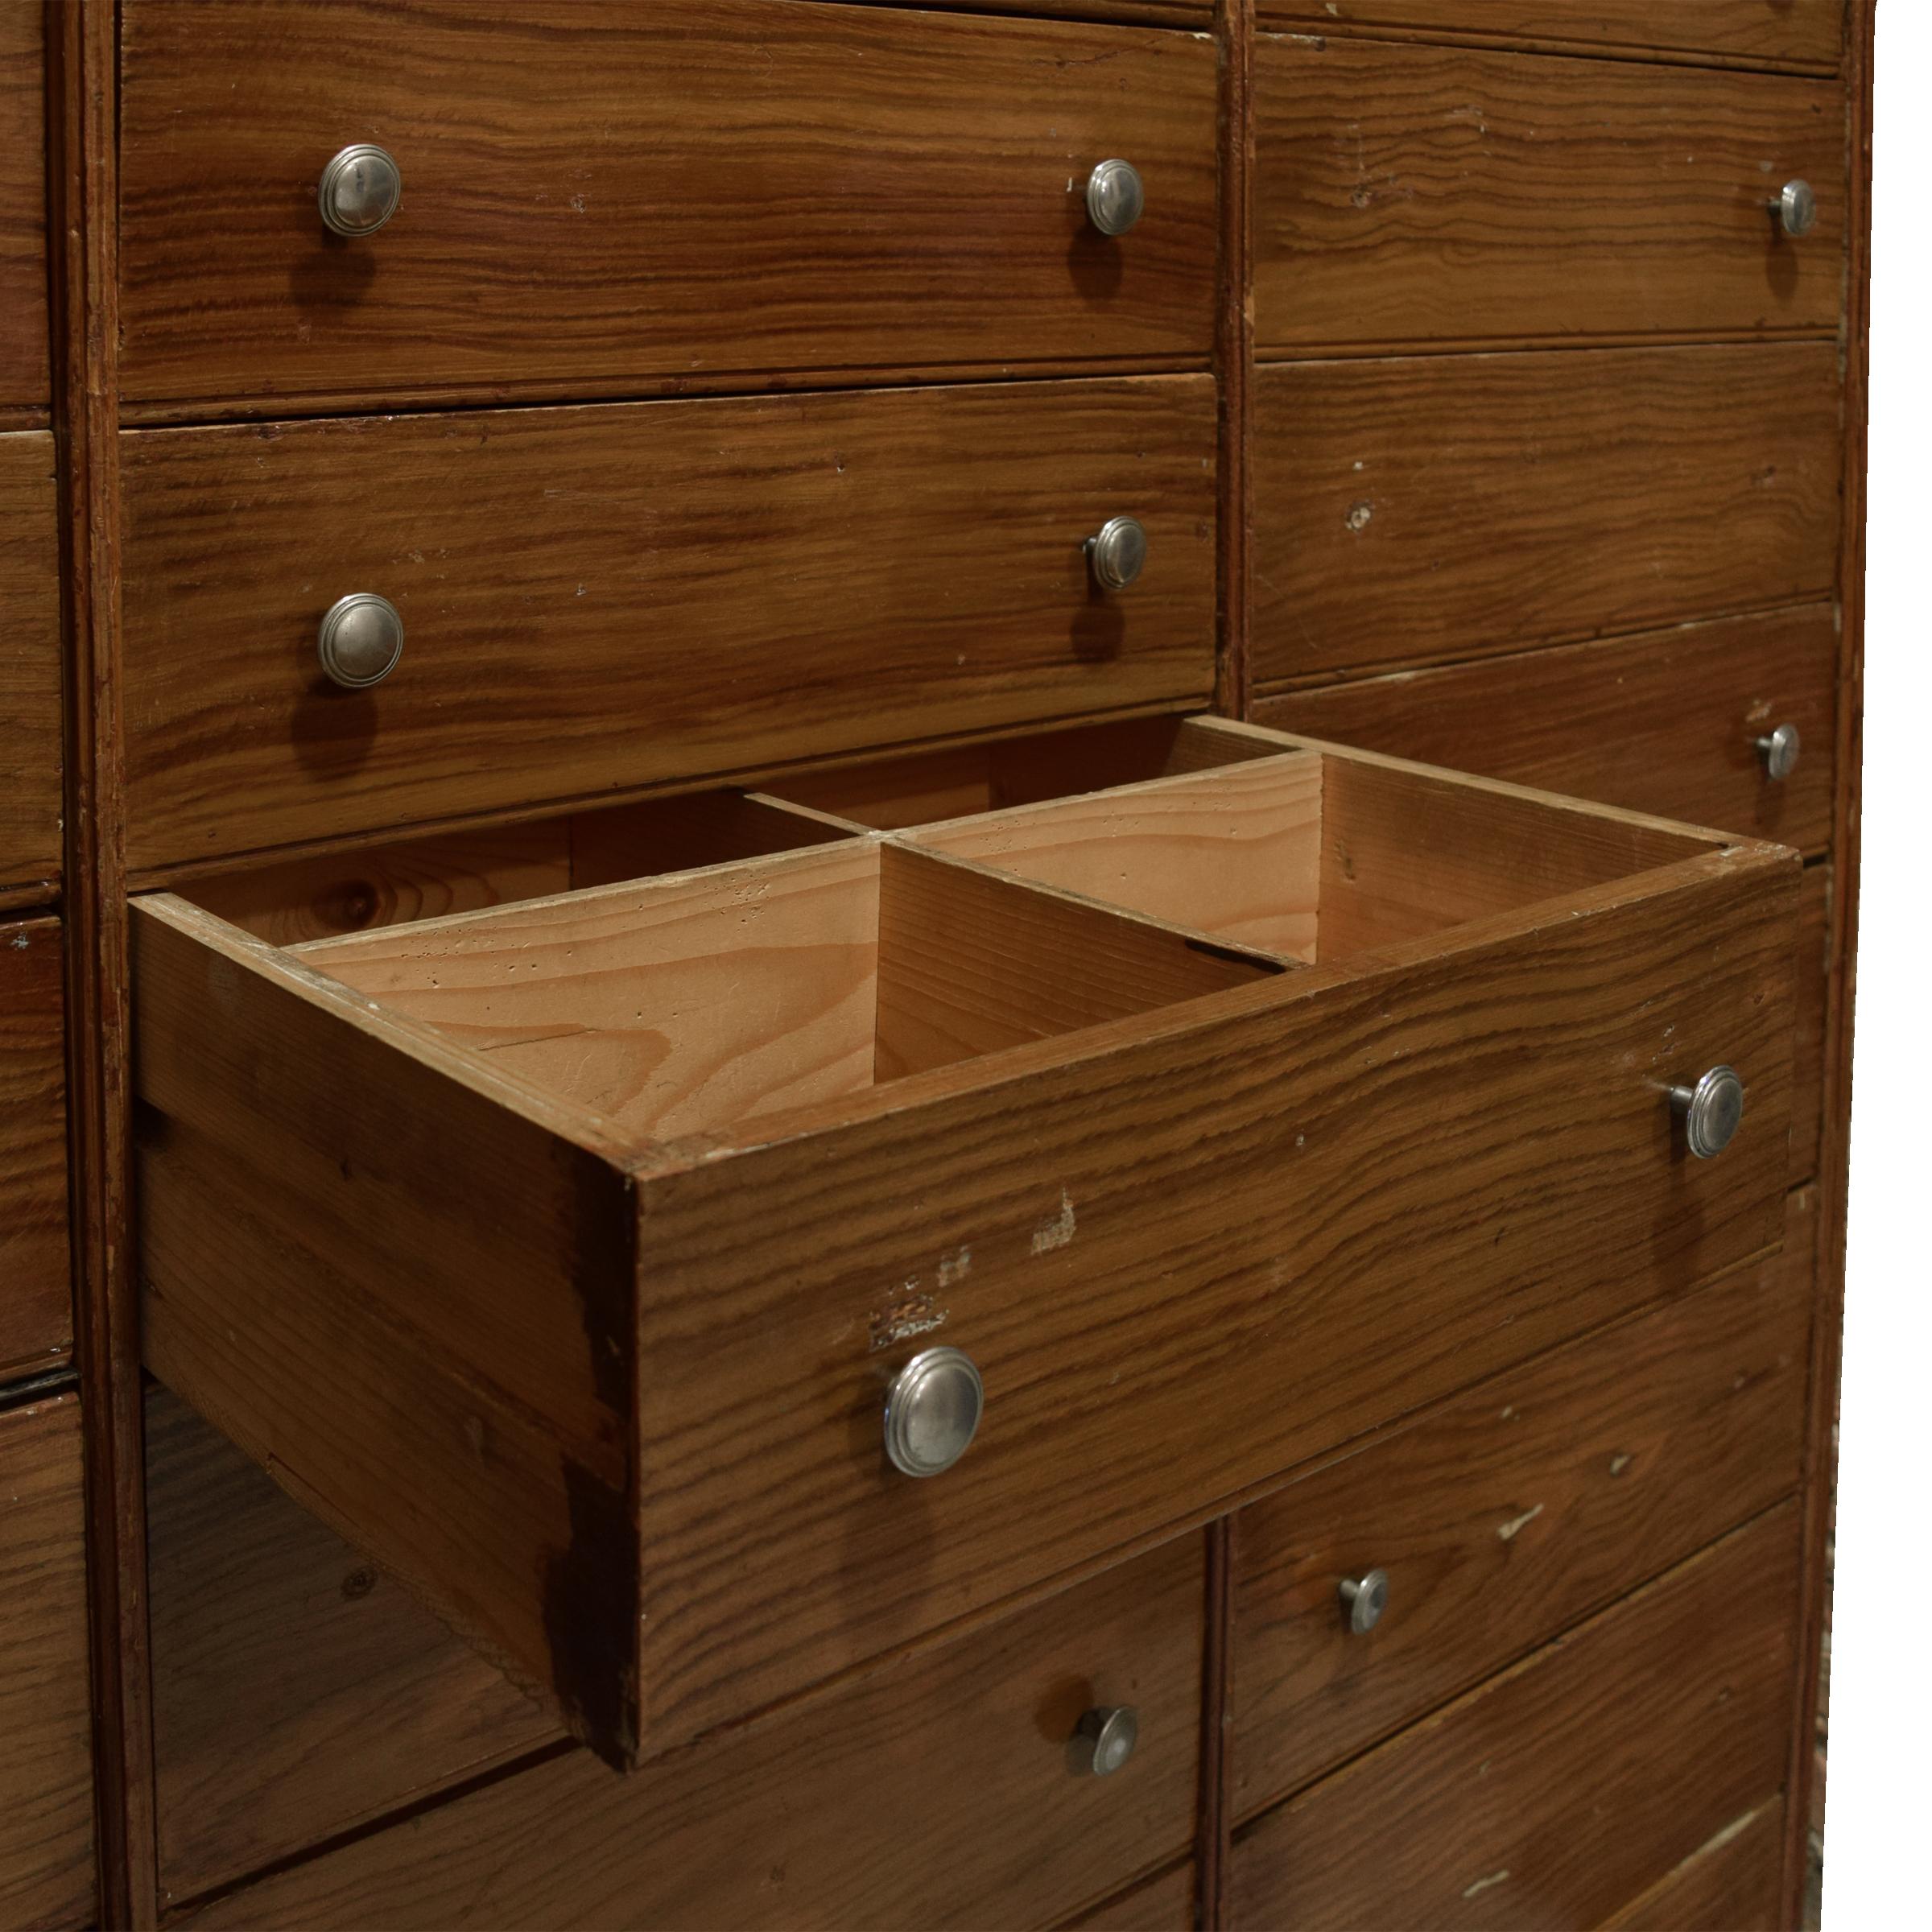 A great Italian cabinet with 39 drawers and a painted faux wood grain finish.